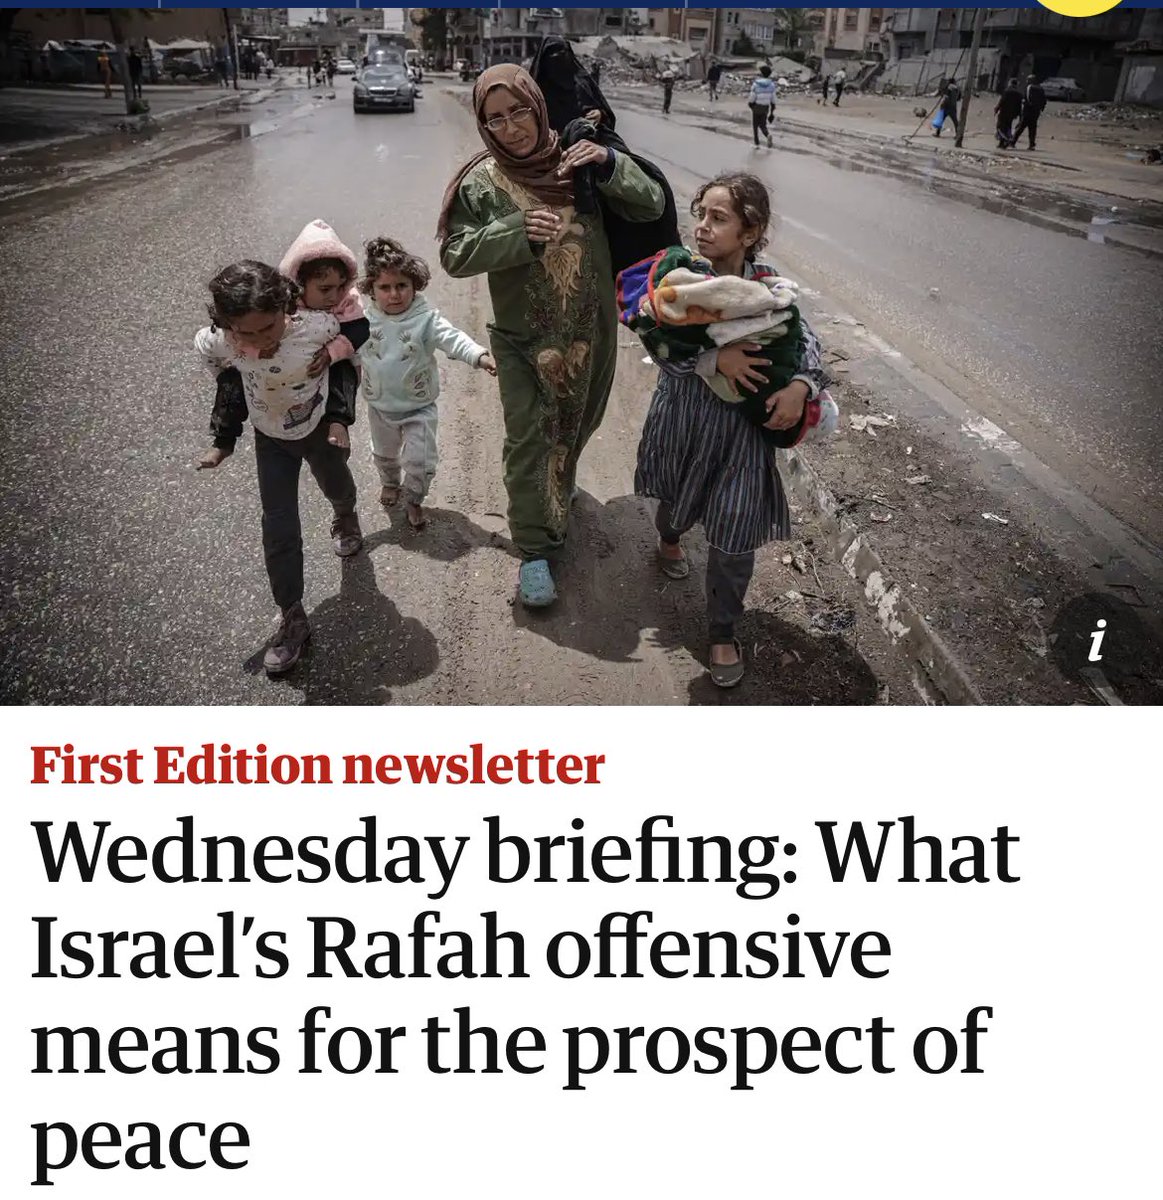 Bro the propaganda we’re being subjected to is next level after Israel’s invasion of Rafah How does committing mass slaughter in a refugee camp possibly lead to peace?